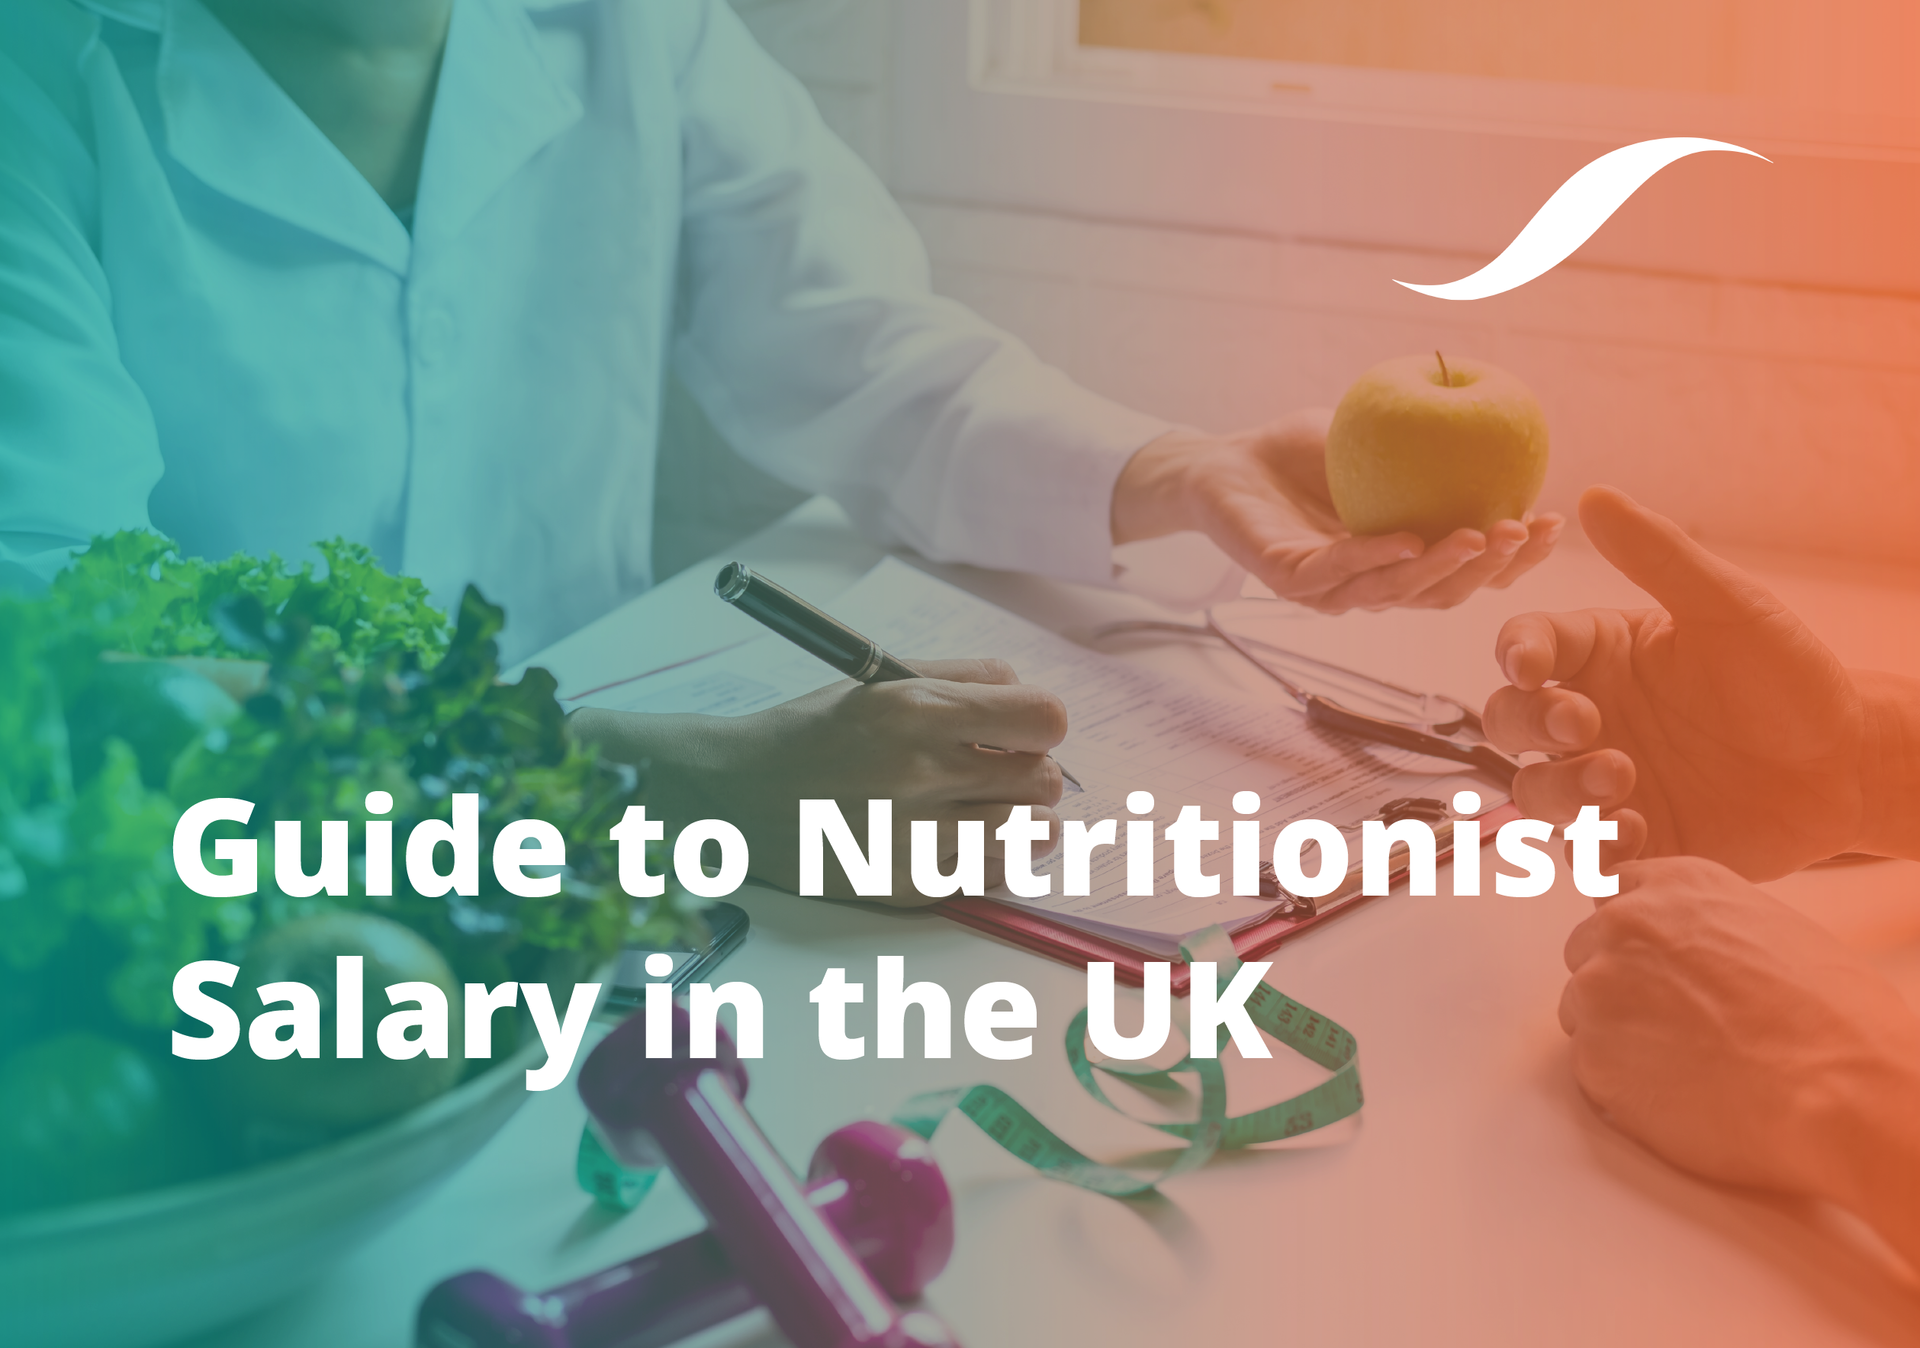 Guide to Nutritionist Salary in the UK (2020) | OriGym